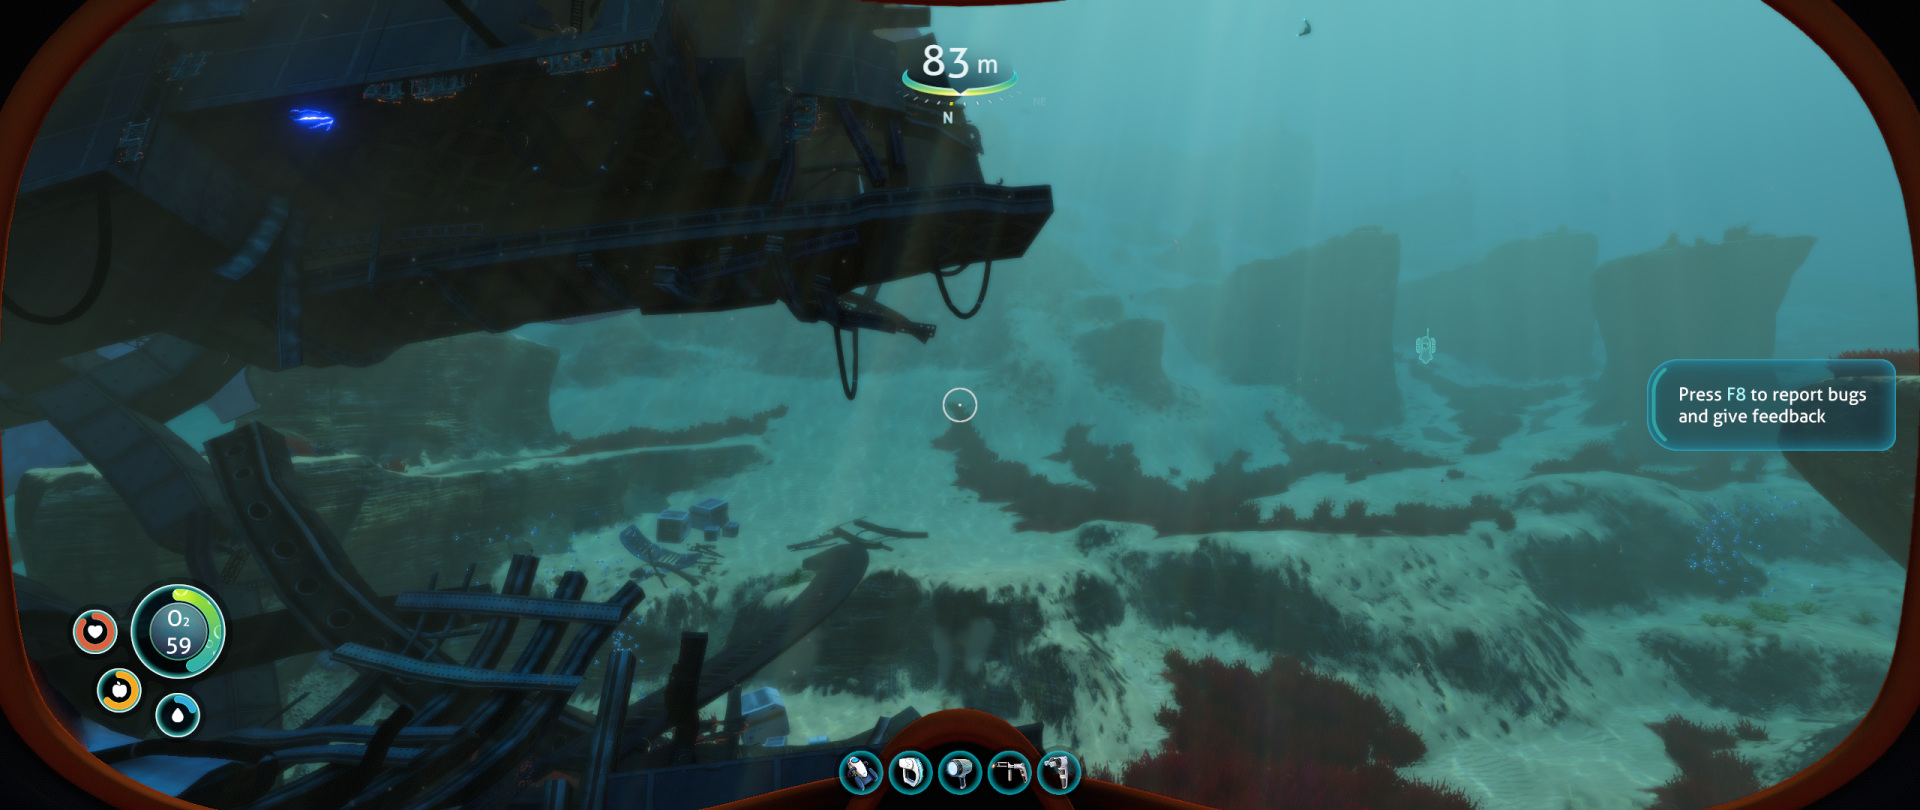 subnautica free download android